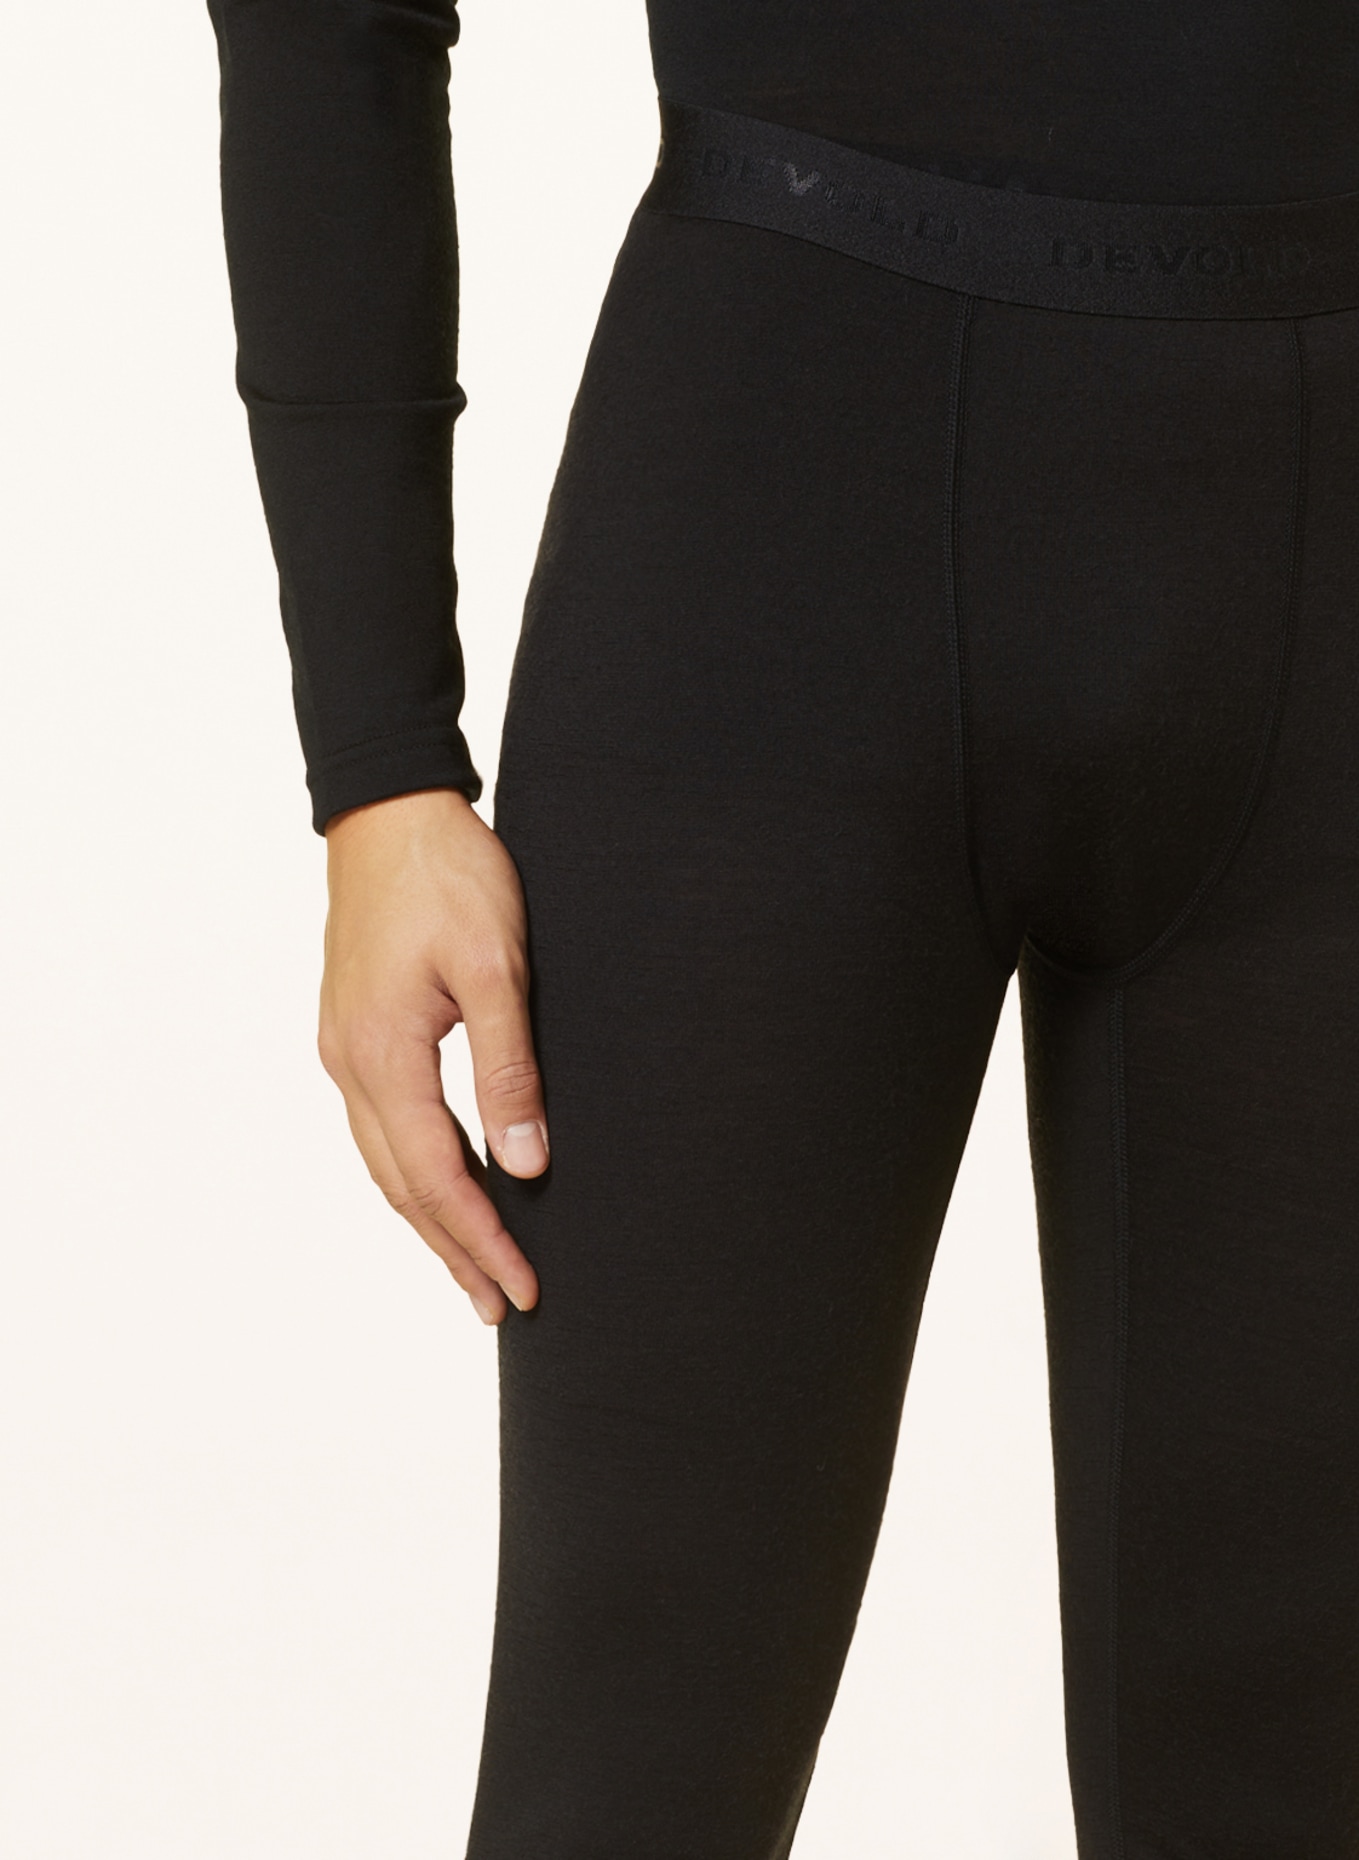 DEVOLD Functional underwear pants JAKTA in merino wool and with cropped leg length, Color: BLACK (Image 5)